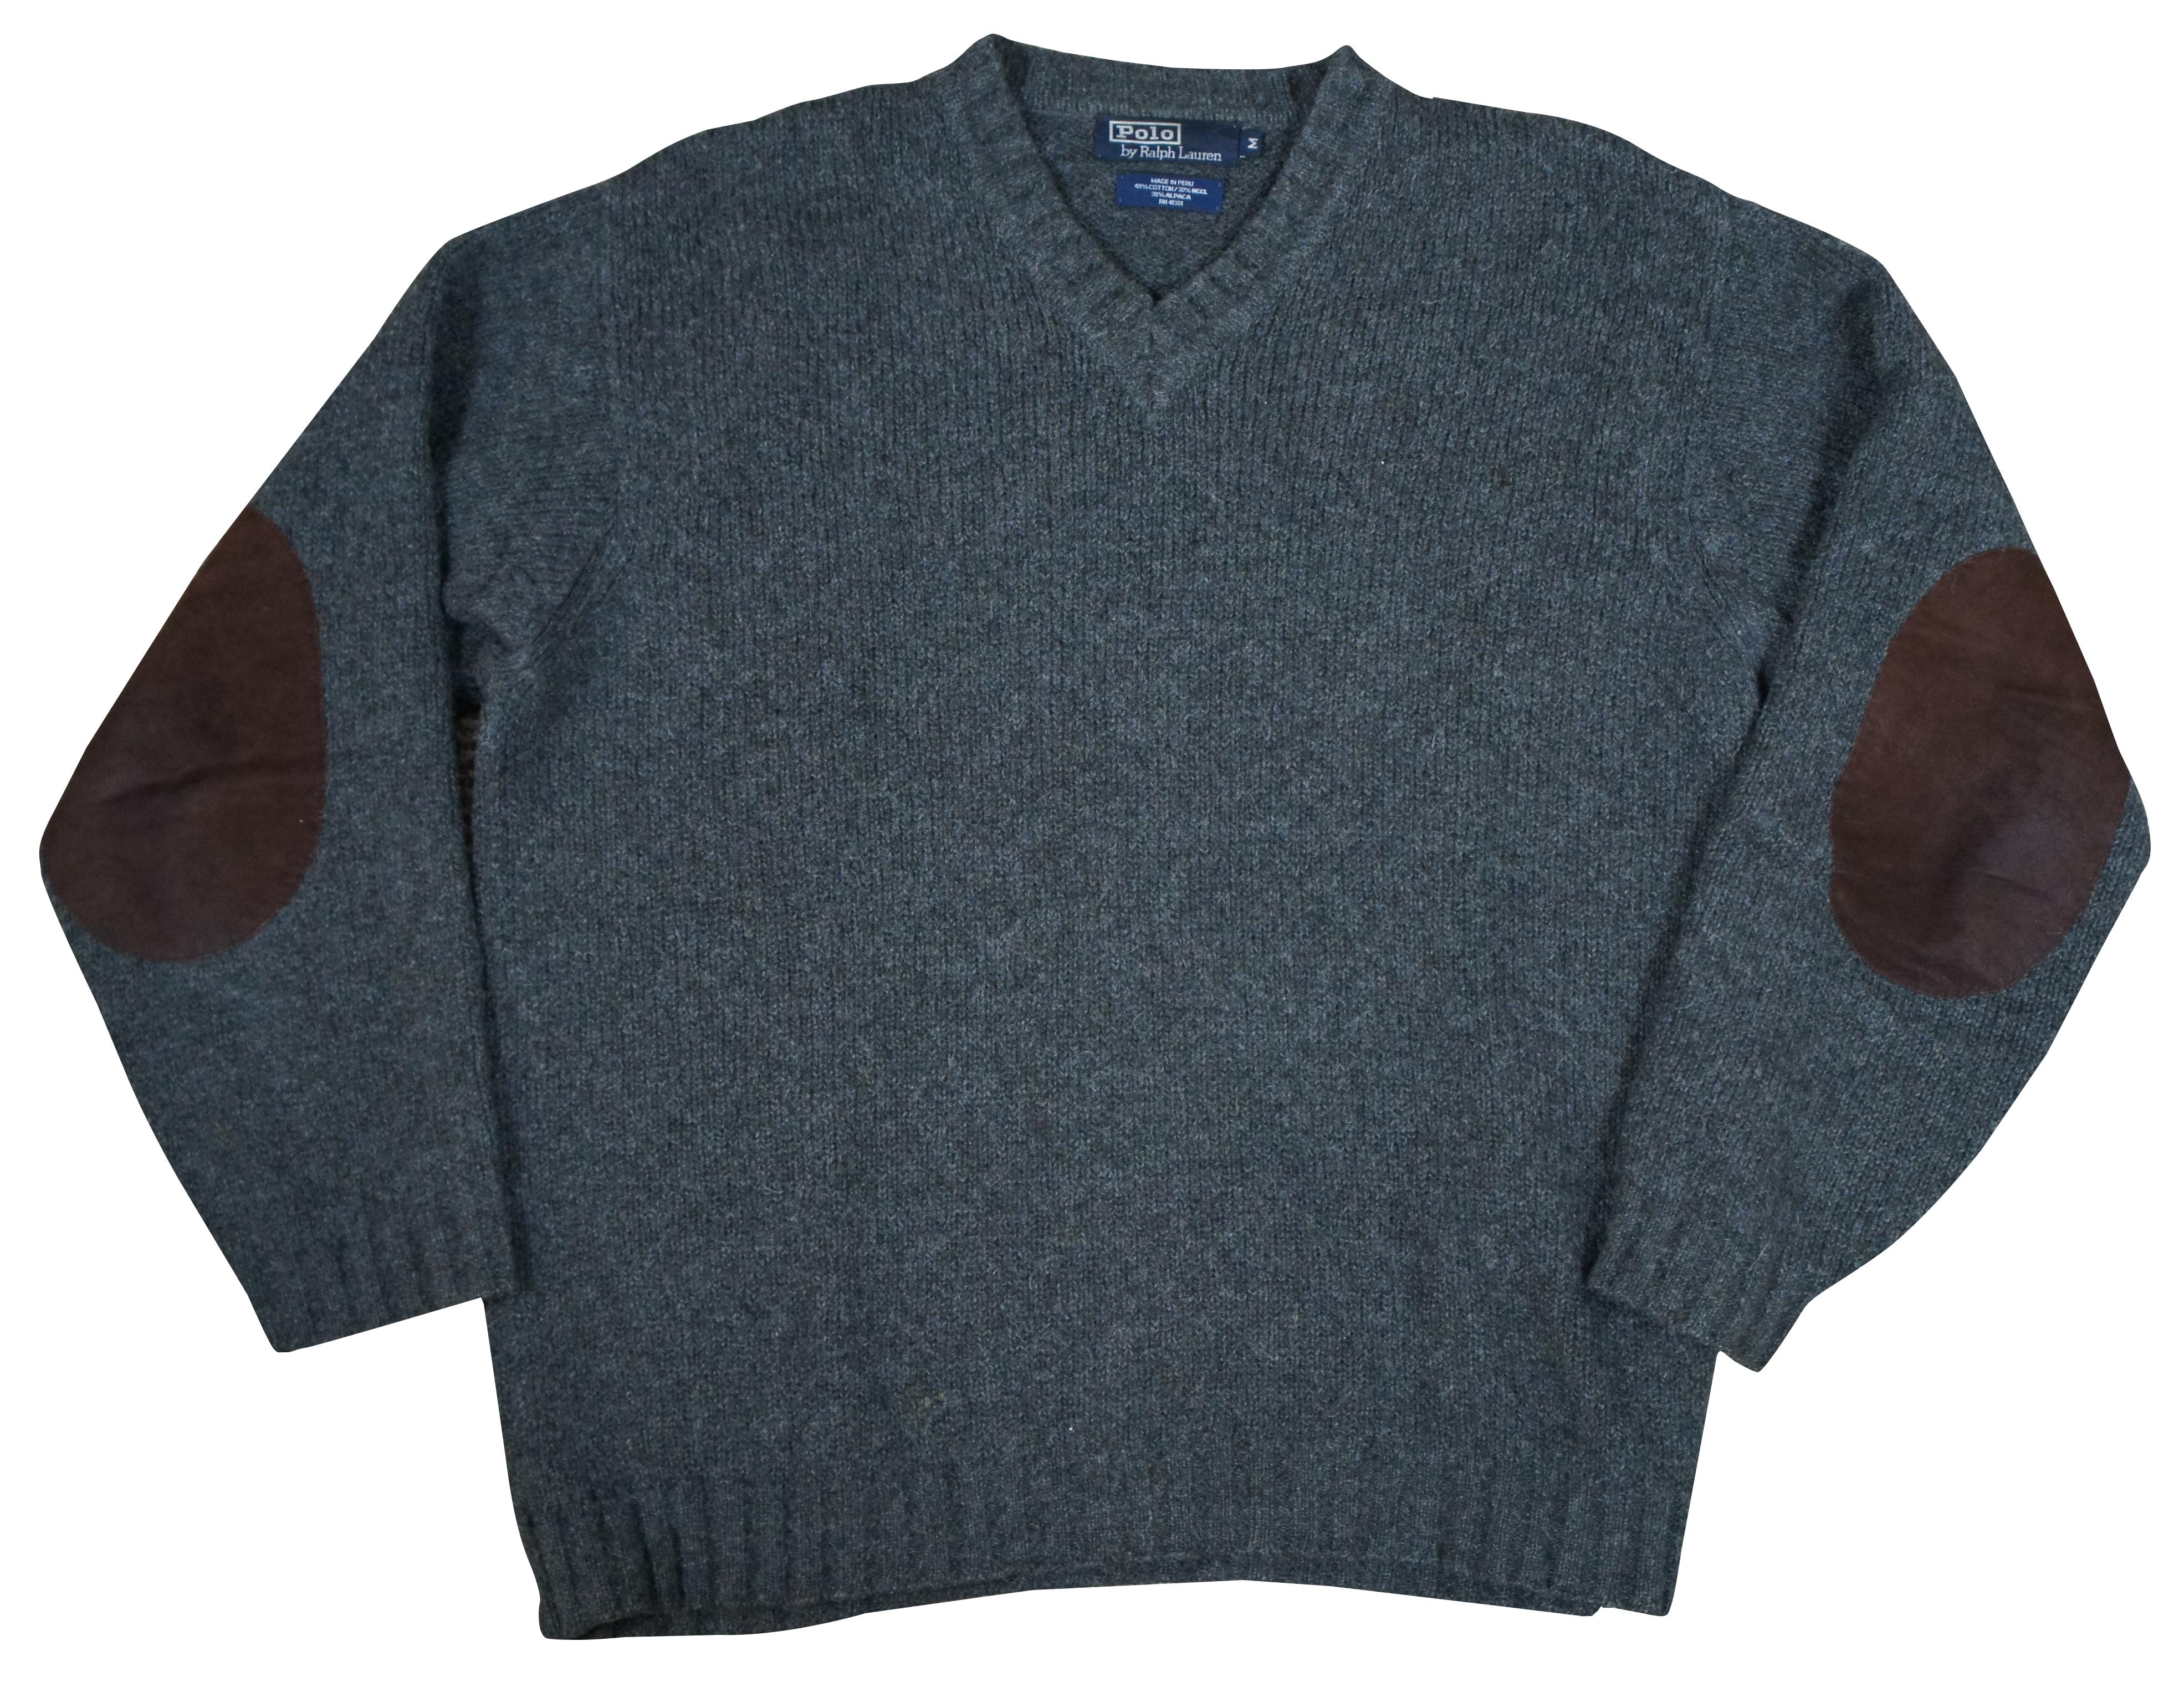 Polo Ralph Lauren pull over long sleeve sweater in gray cotton / wool / alpaca blend with brown leather elbow patches.

Size M / Shoulders - 21” / Arm Length - 24” / Chest - 52” / Back Length – 29”.